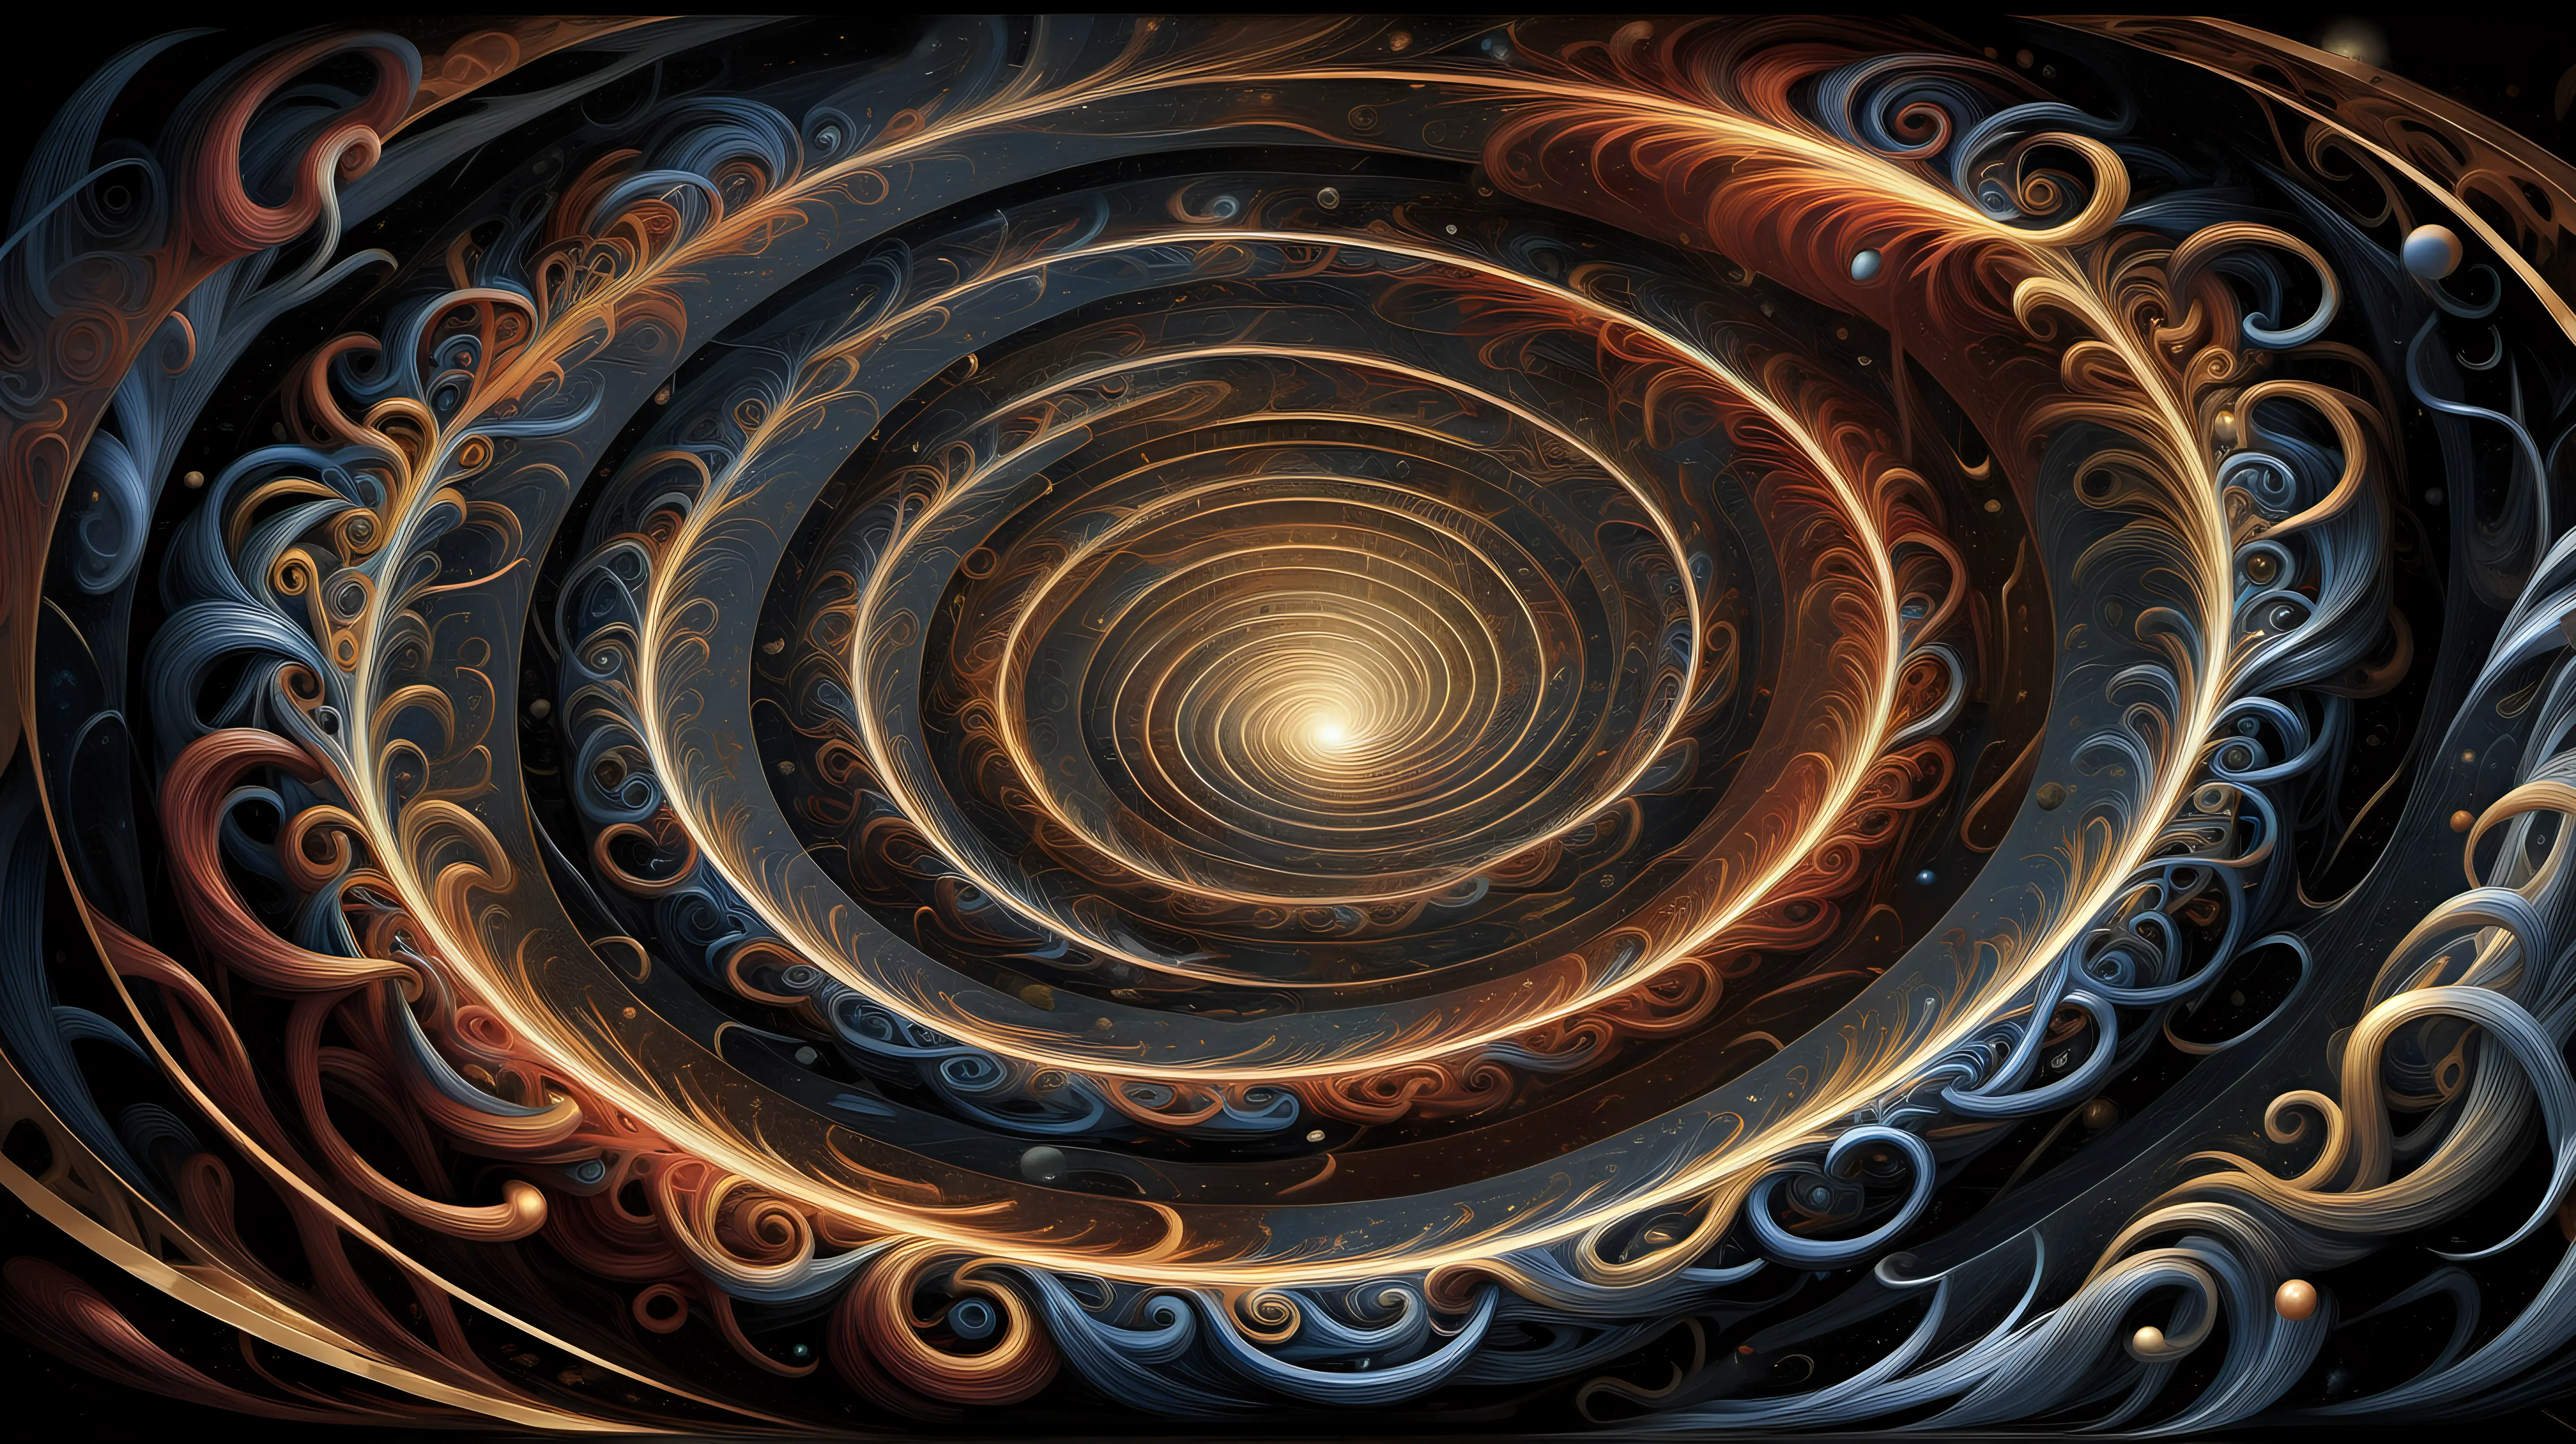 Concept: A surreal image depicting the transformation from chaos to organization, using mathematical symbols, light rays, and swirls to represent the different stages.  Elements:      Chaos:         A swirling vortex of dark, smoky colors, filled with fragmented shapes, mathematical symbols, and nonsensical equations.         Light rays pierce through the edges of the vortex, hinting at the possibility of order.     Transition:         The vortex begins to unravel, with tendrils of light pulling the fragmented shapes and symbols towards a central point.         The mathematical symbols start to align and form coherent patterns.     Organization:         A central sphere of light emerges, radiating outward and illuminating the scene.         The fragmented shapes have transformed into organized structures, resembling geometric shapes, celestial bodies, or even abstract forms.         The mathematical symbols form a harmonious composition, representing the underlying order of the universe.  Additional details:      Use a vibrant color palette with contrasting light and dark tones.     Play with the scale and perspective to create a sense of awe and wonder.     Incorporate elements of movement and flow to depict the dynamic nature of change.     Aim for a dreamlike and otherworldly atmosphere.